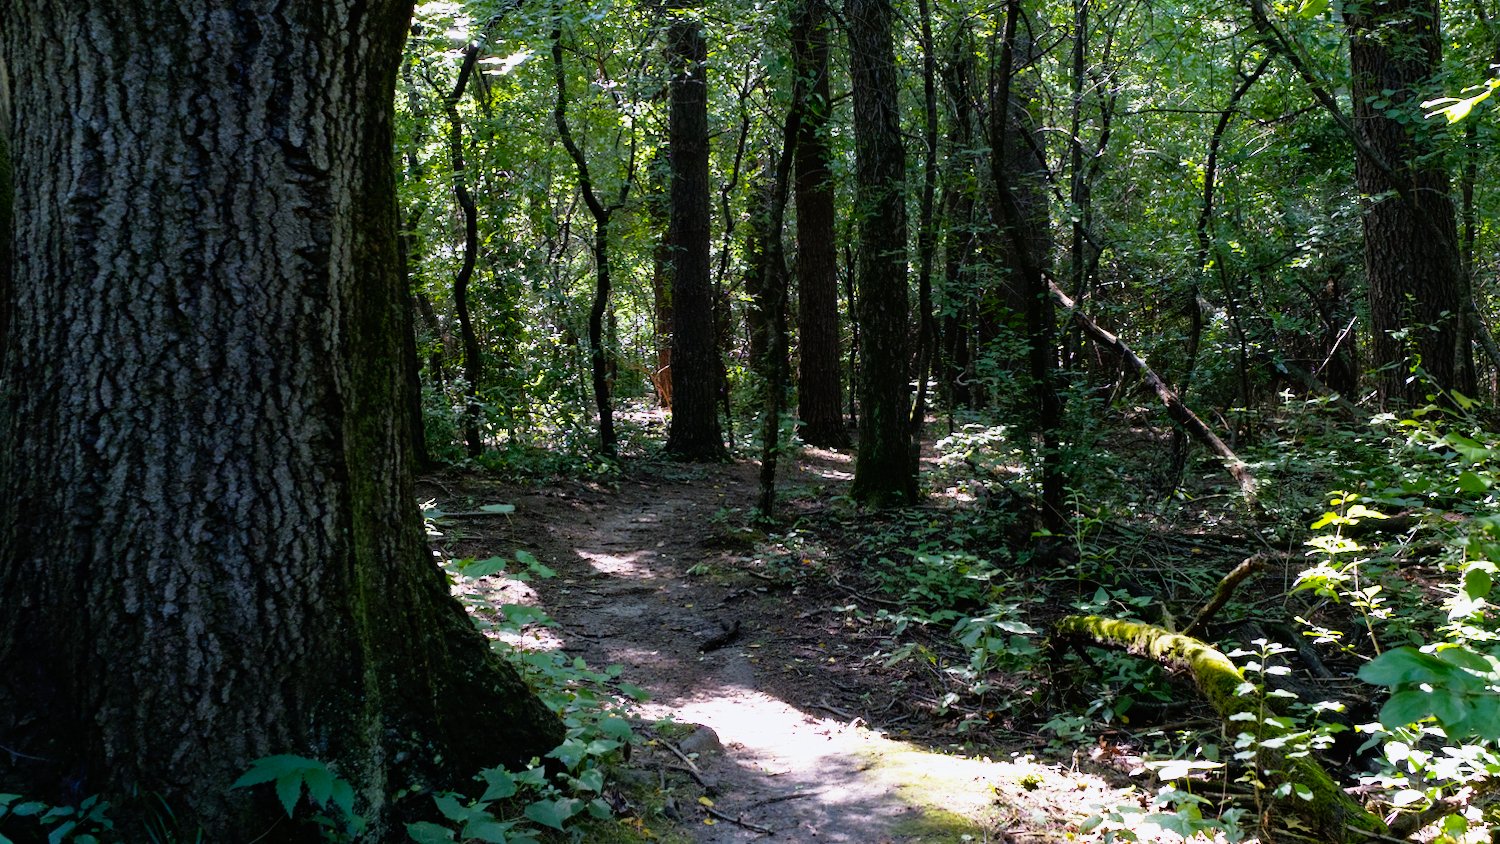 Trail through Sterne's Woods.